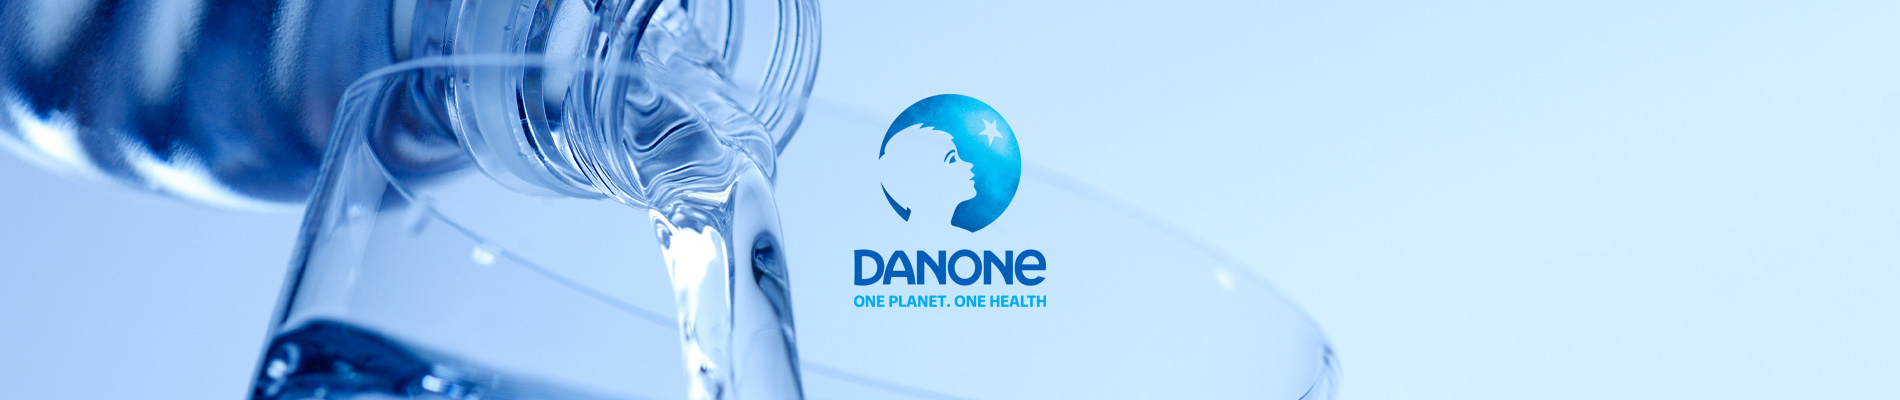 Danone-Waters logo and bottle of water